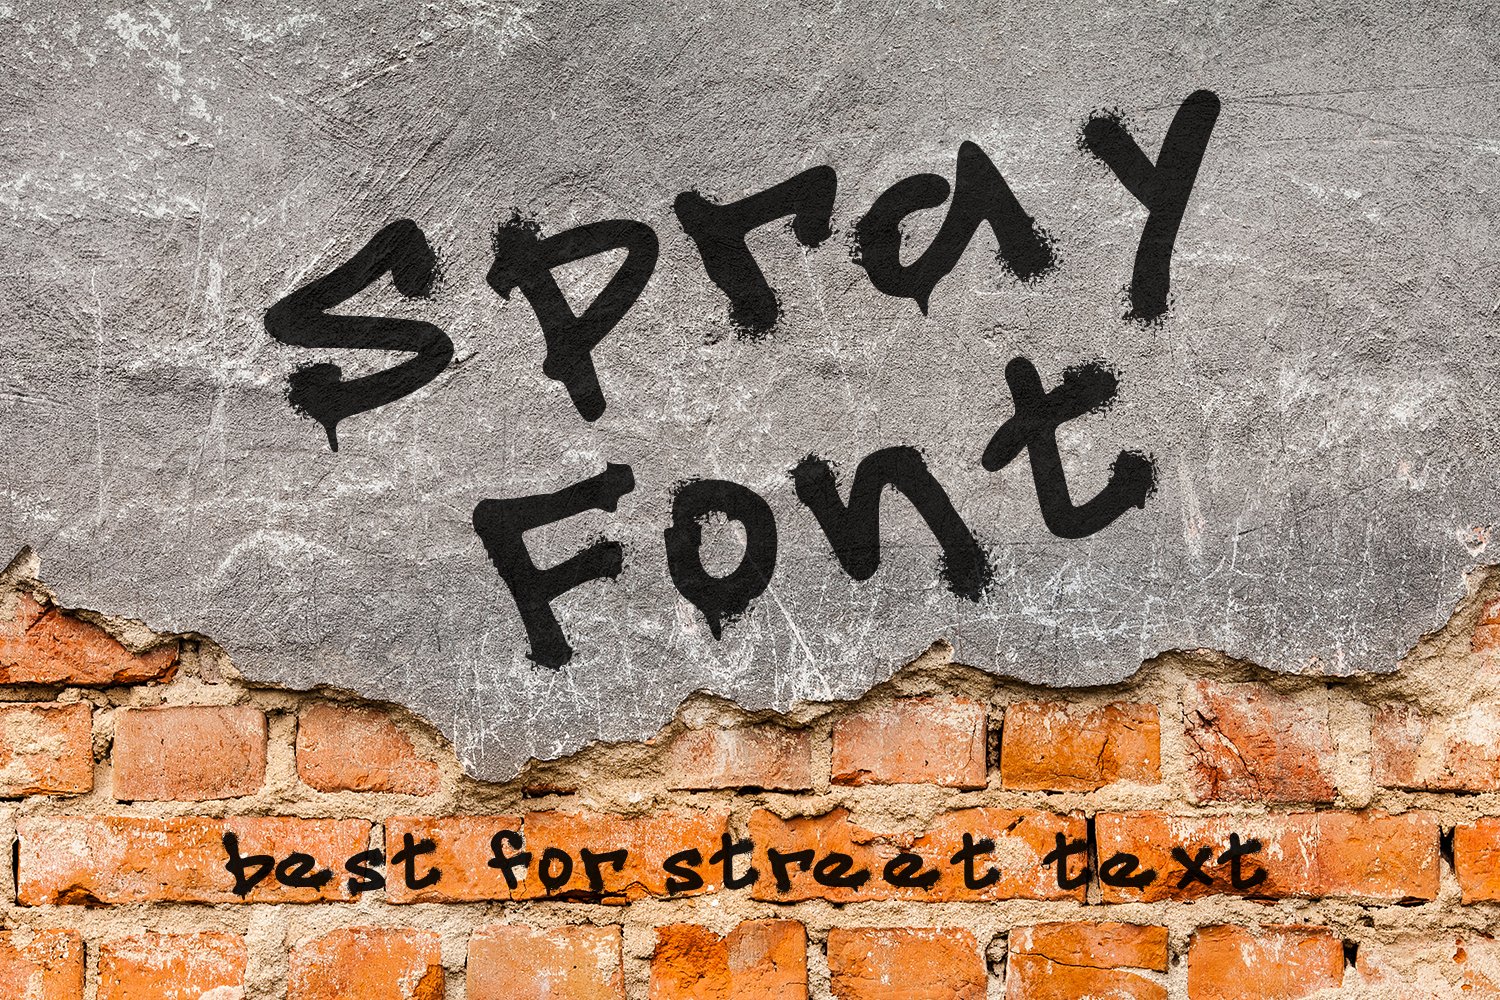 Spray Font cover image.